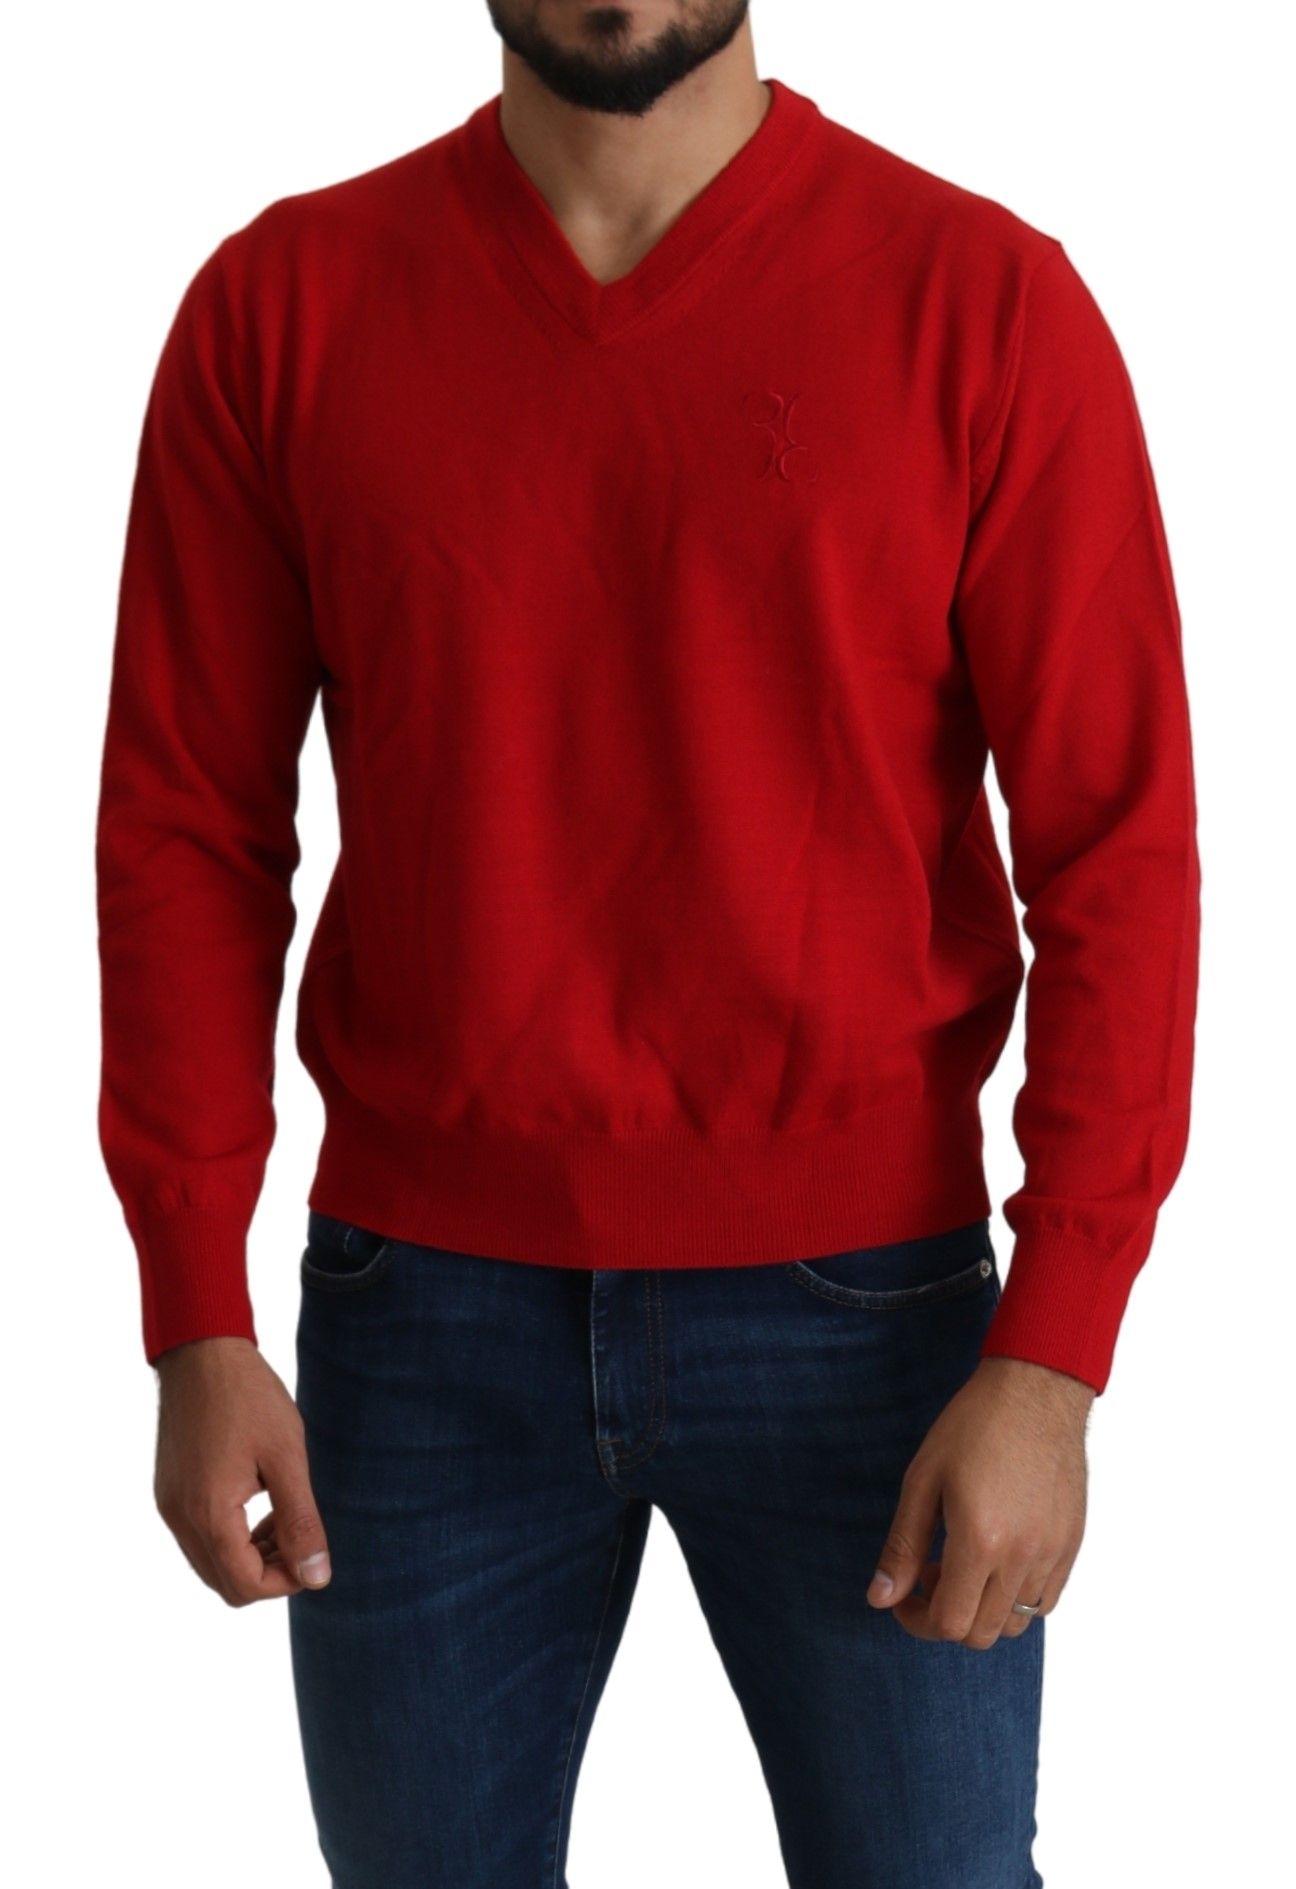 Billionaire Italian Couture Men's Red V-neck Wool Sweatshirt Pullover Sweater - Designed by Billionaire Italian Couture Available to Buy at a Discounted Price on Moon Behind The Hill Online D